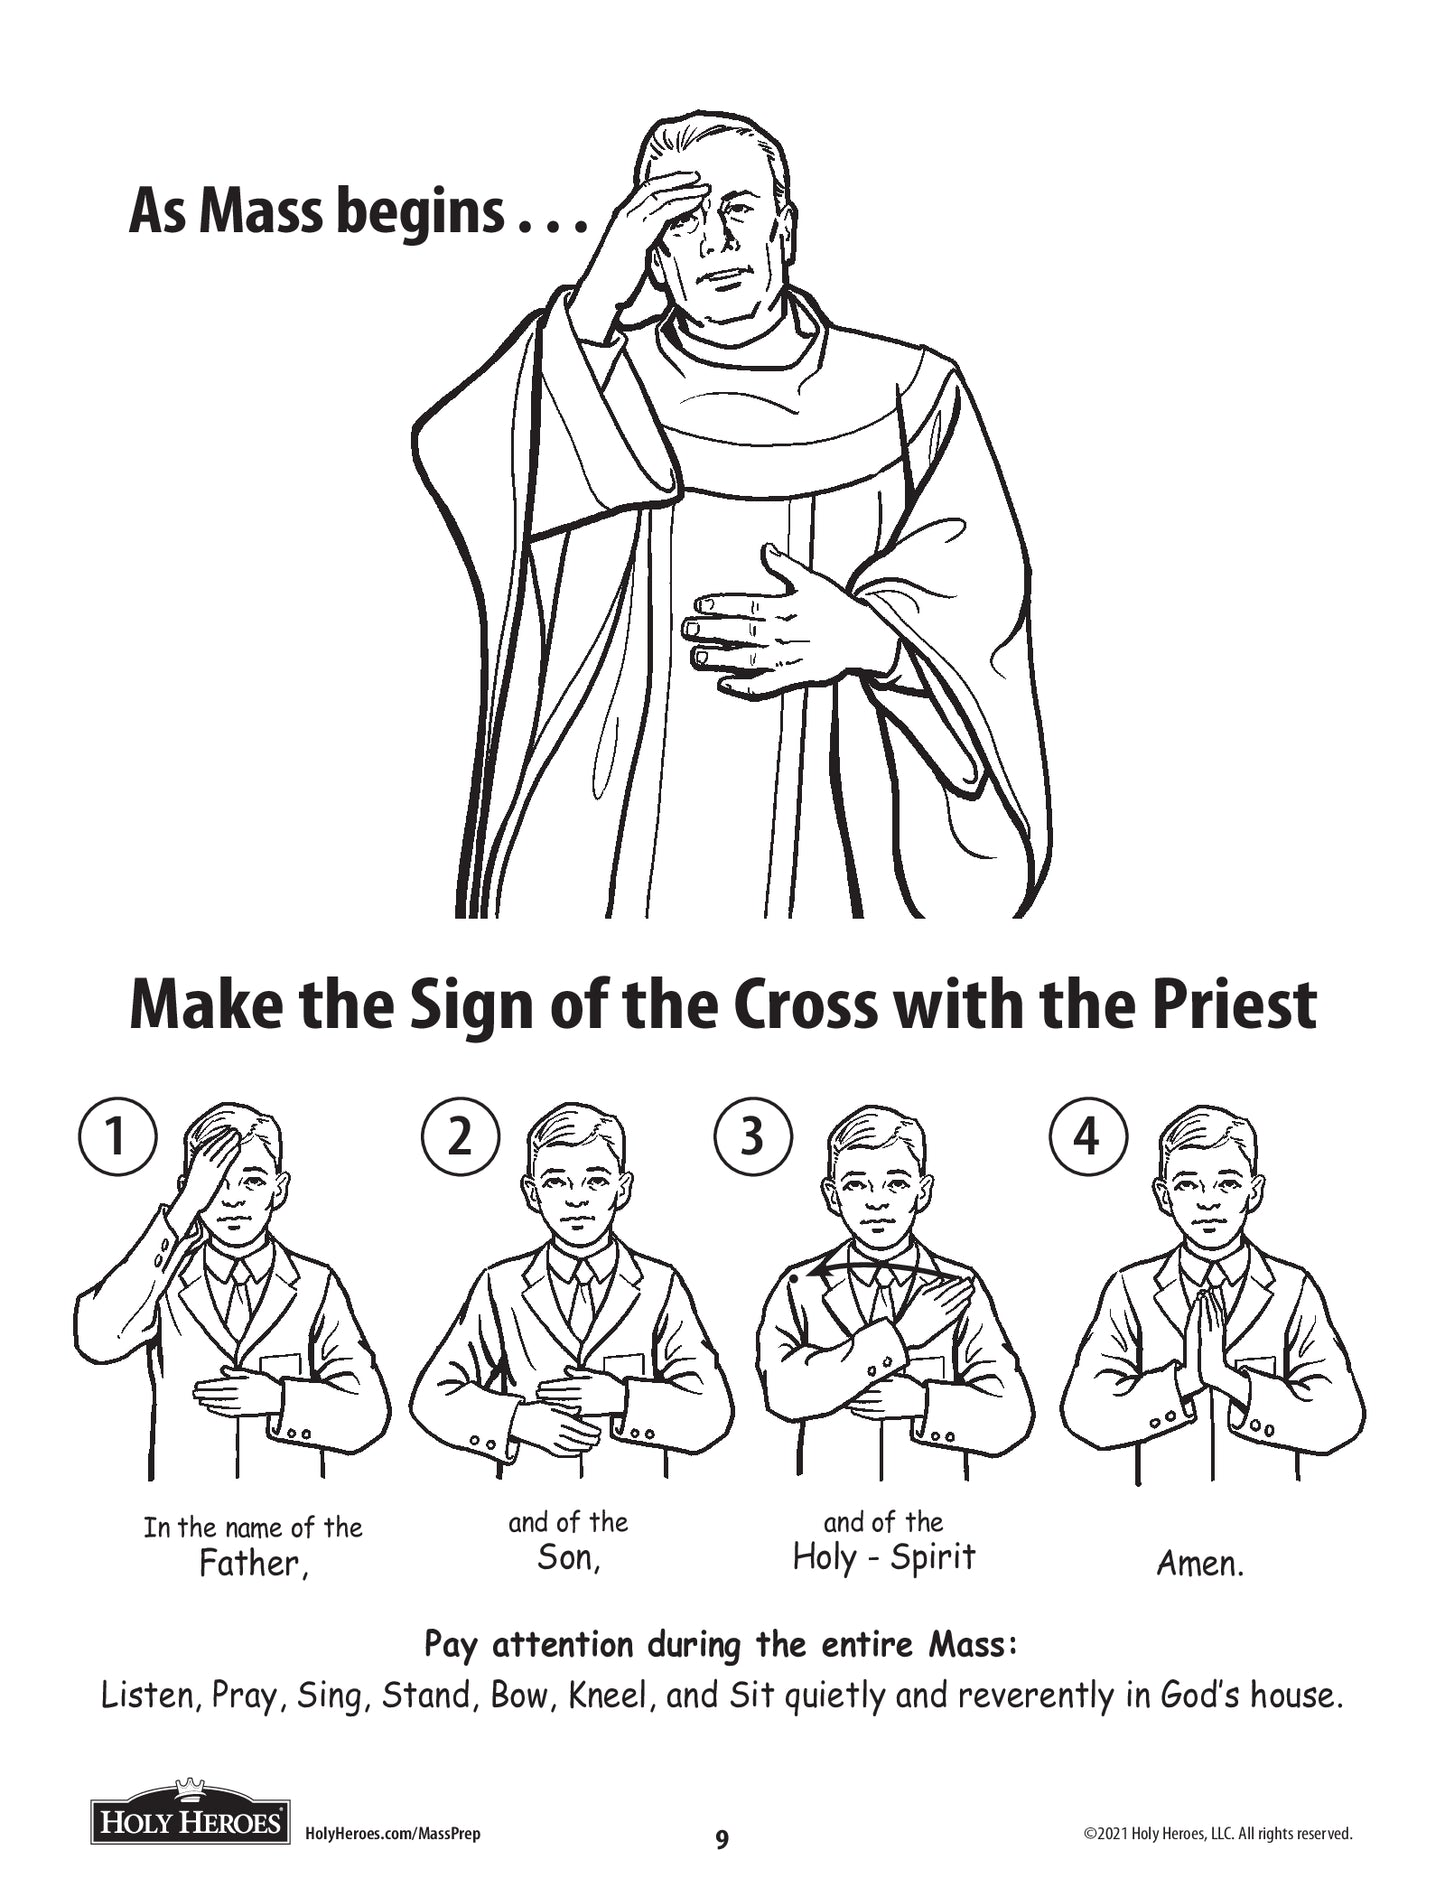 Participating at Holy Mass Coloring Book - Holy Heroes